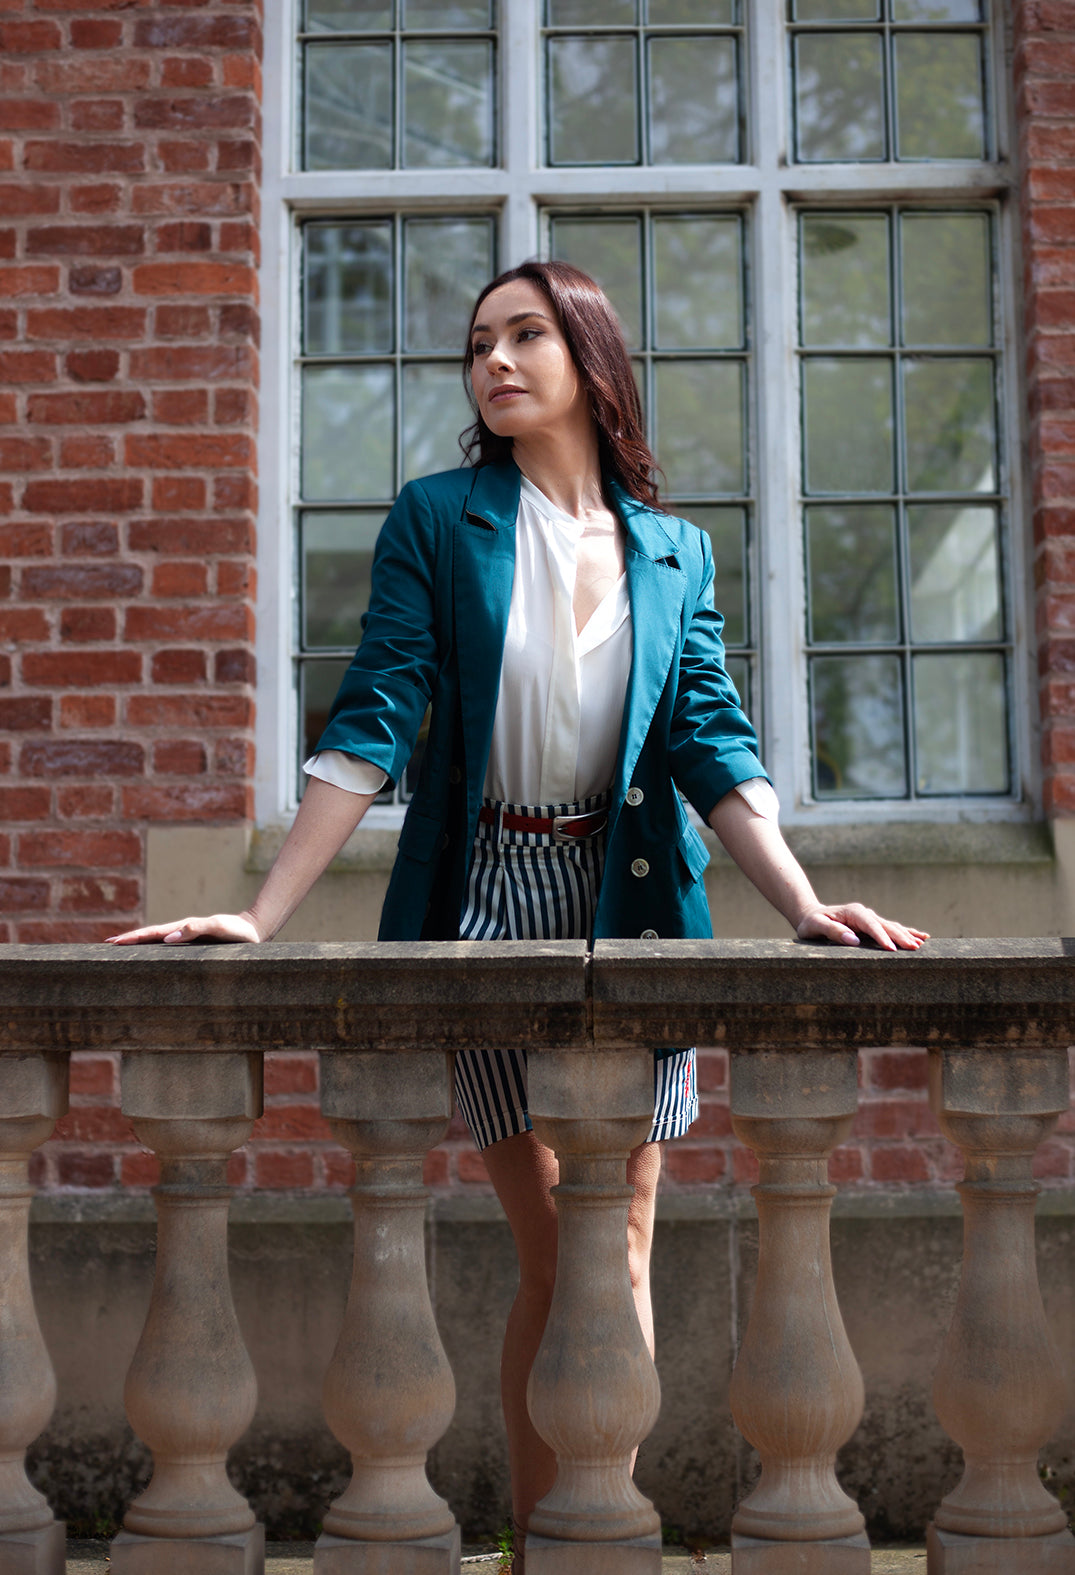 lady leaning over a wall with tailored green jacket on